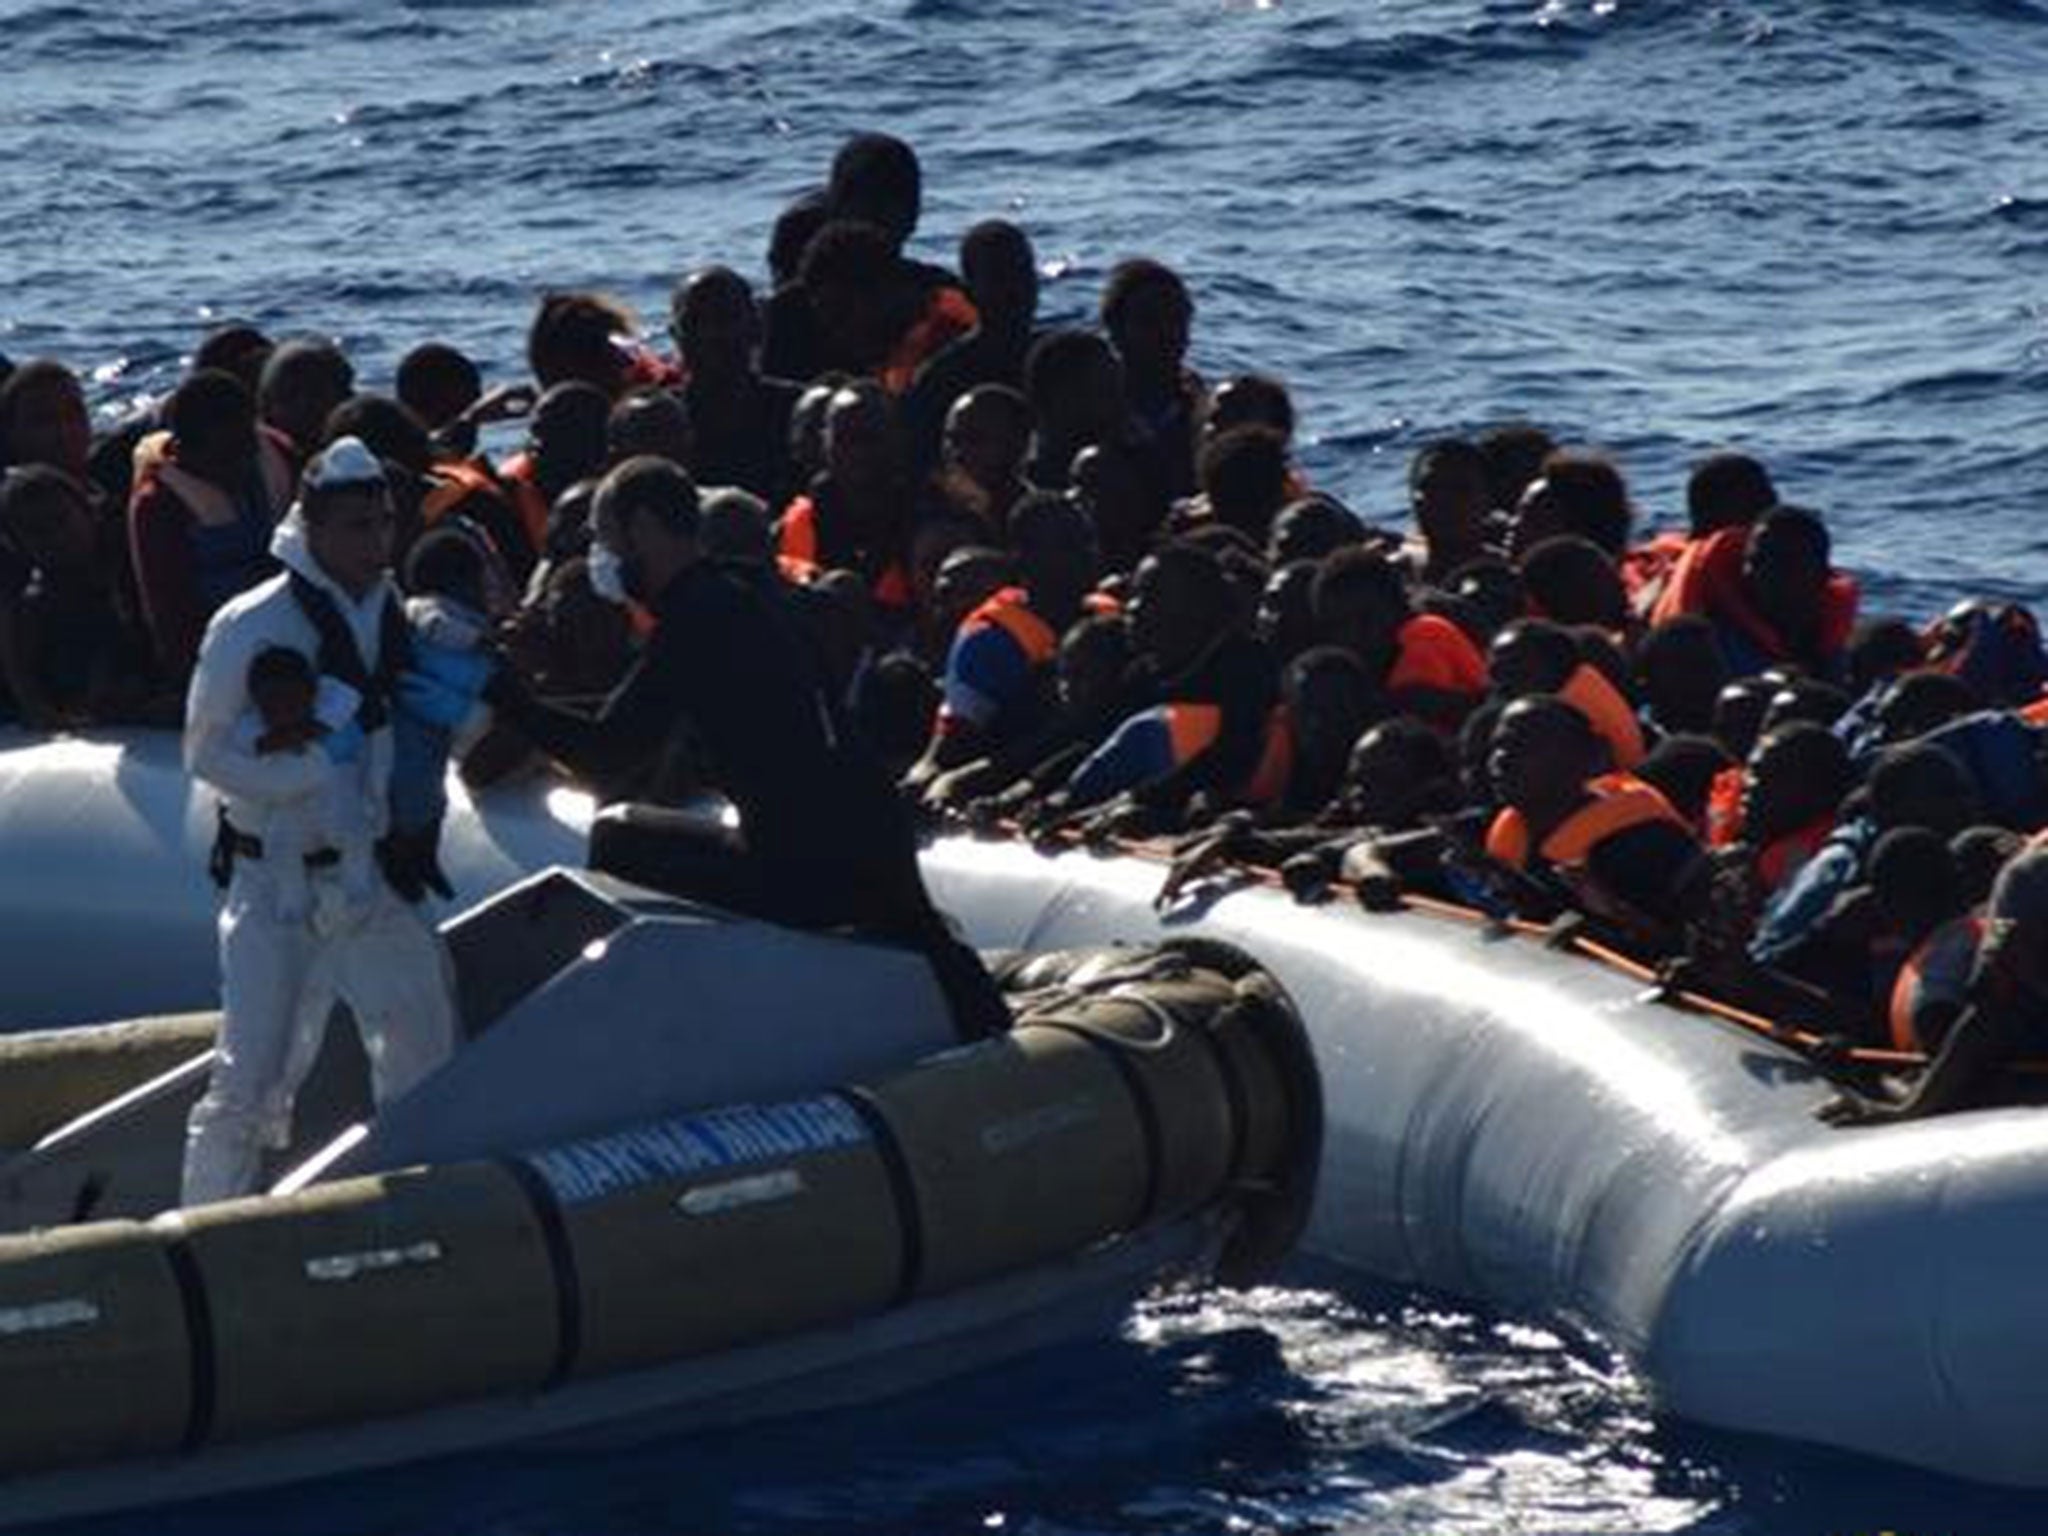 At least 21 refugees died as the boat hit a storm off the coast of Granada